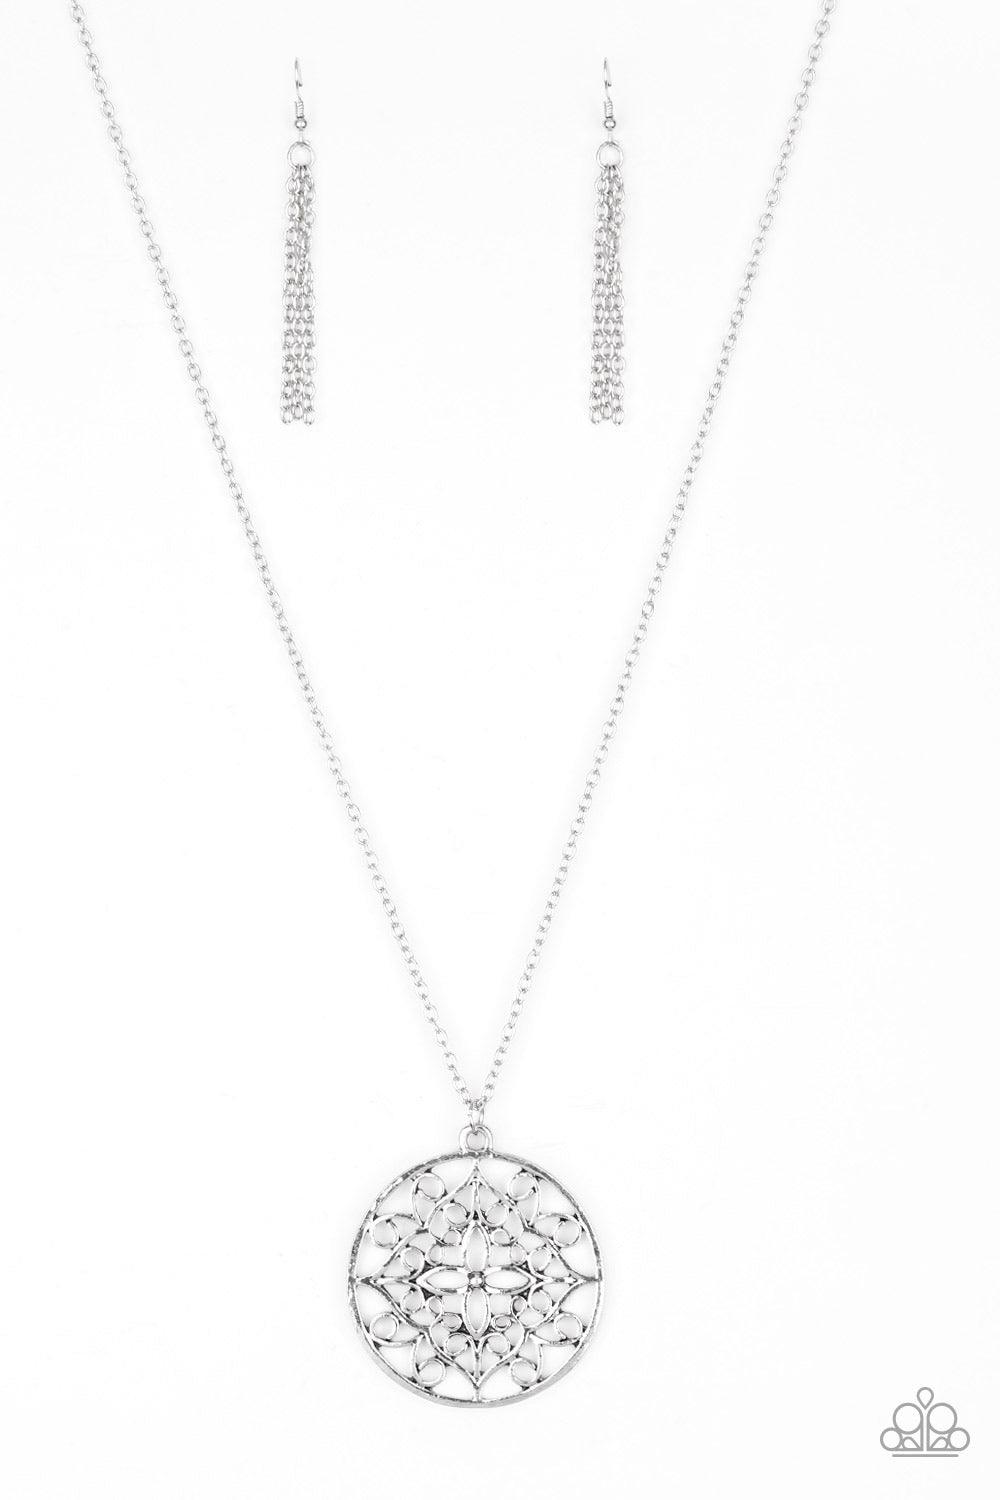 Paparazzi Accessories Mandala Melody - Silver Featuring a whimsical mandala pattern, a glistening silver pendant swings from the bottom of a lengthened silver chain for a seasonal look. Features an adjustable clasp closure. Jewelry